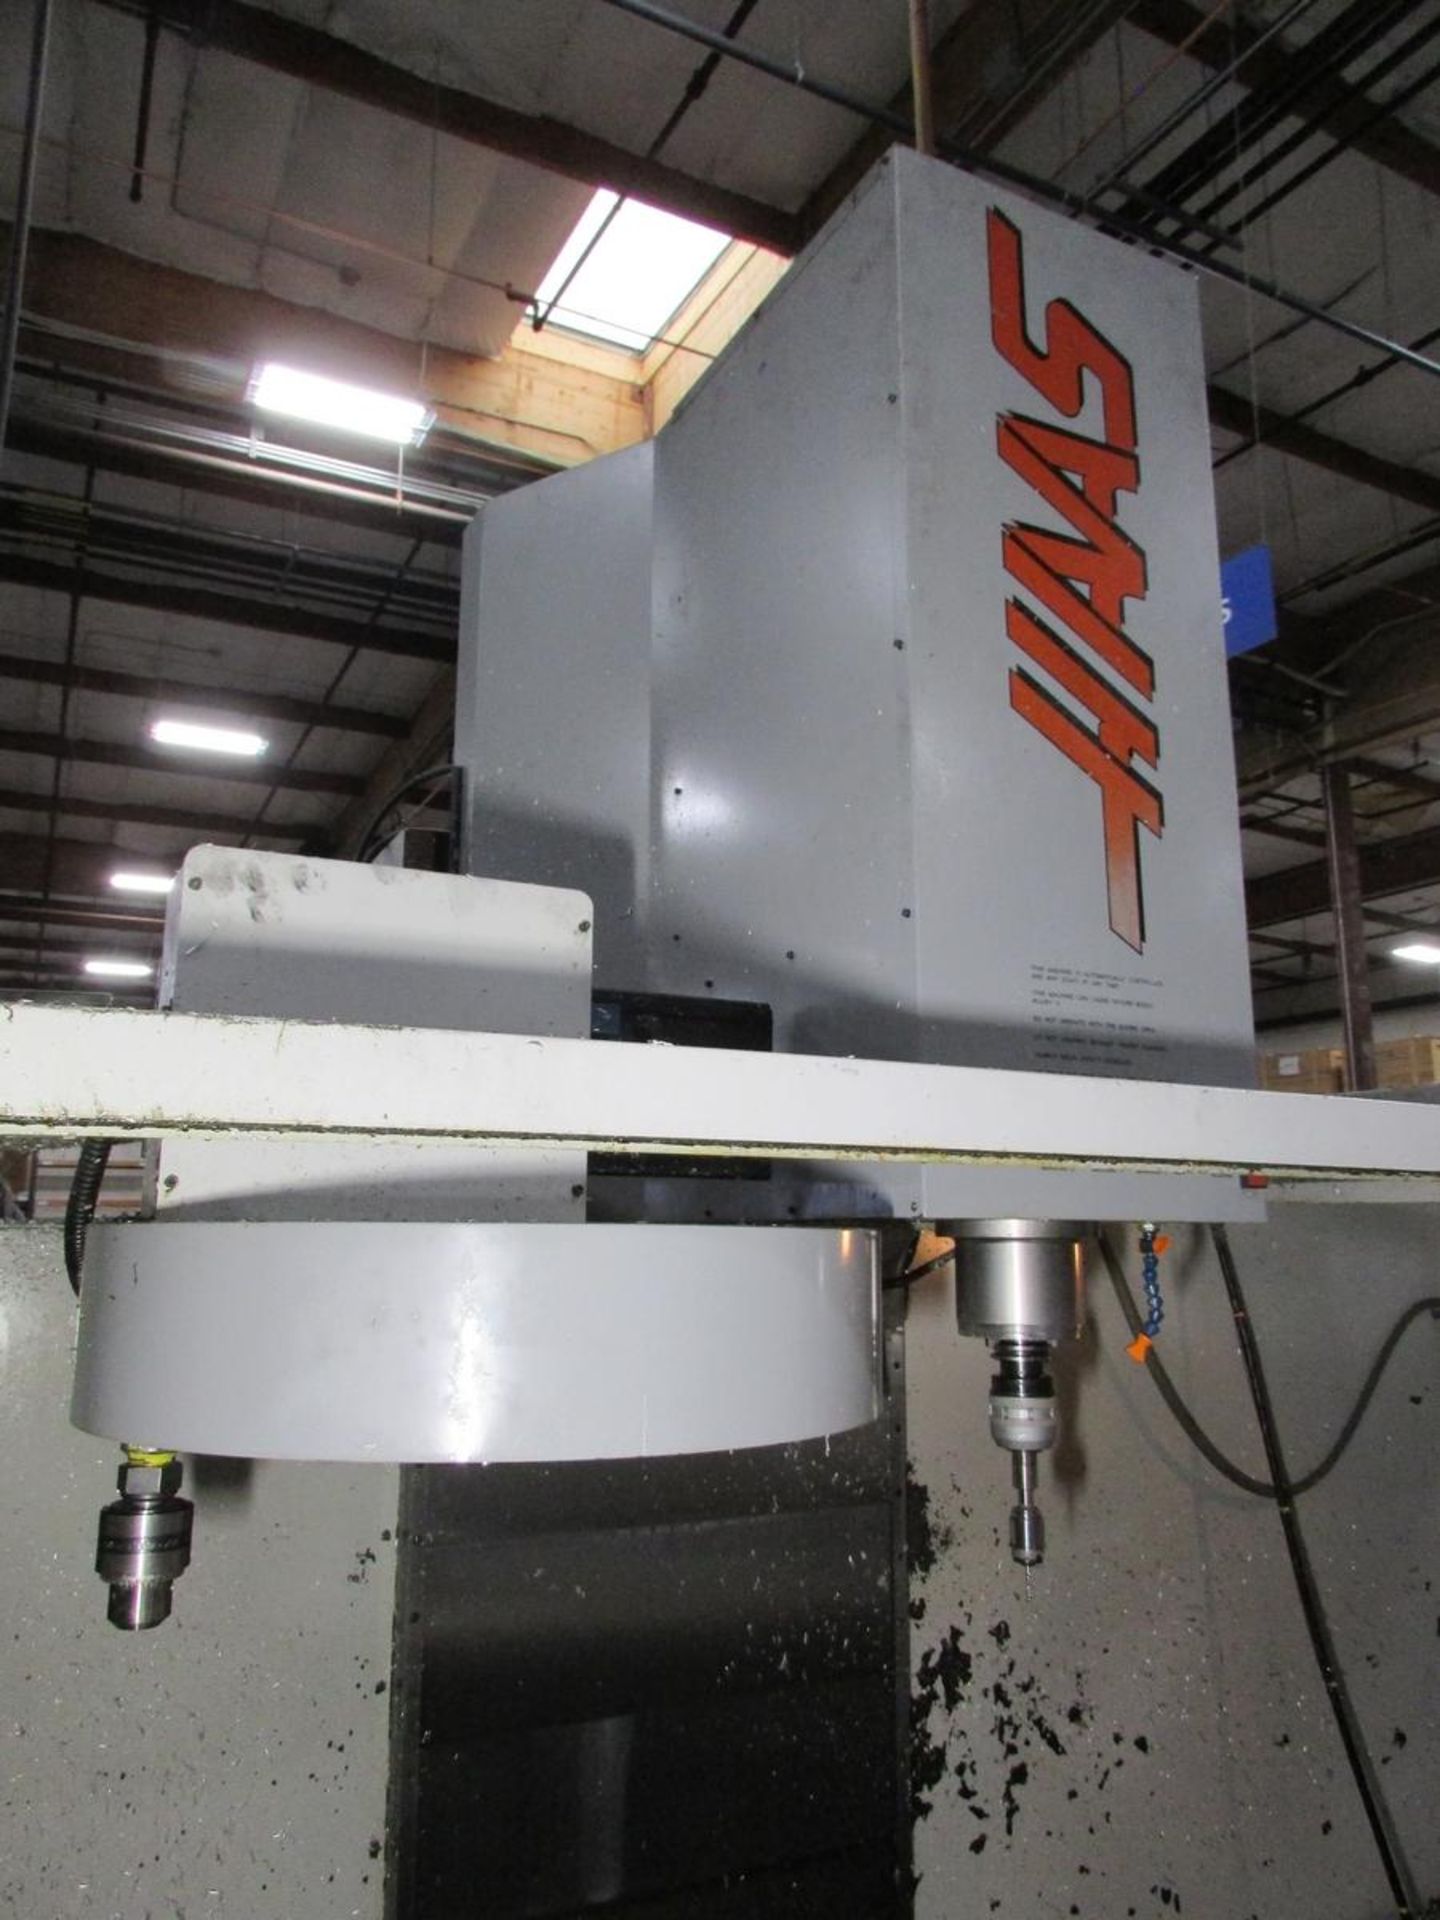 1997 Haas VF-7 4-Axis CNC Vertical Maching Center - Image 10 of 30